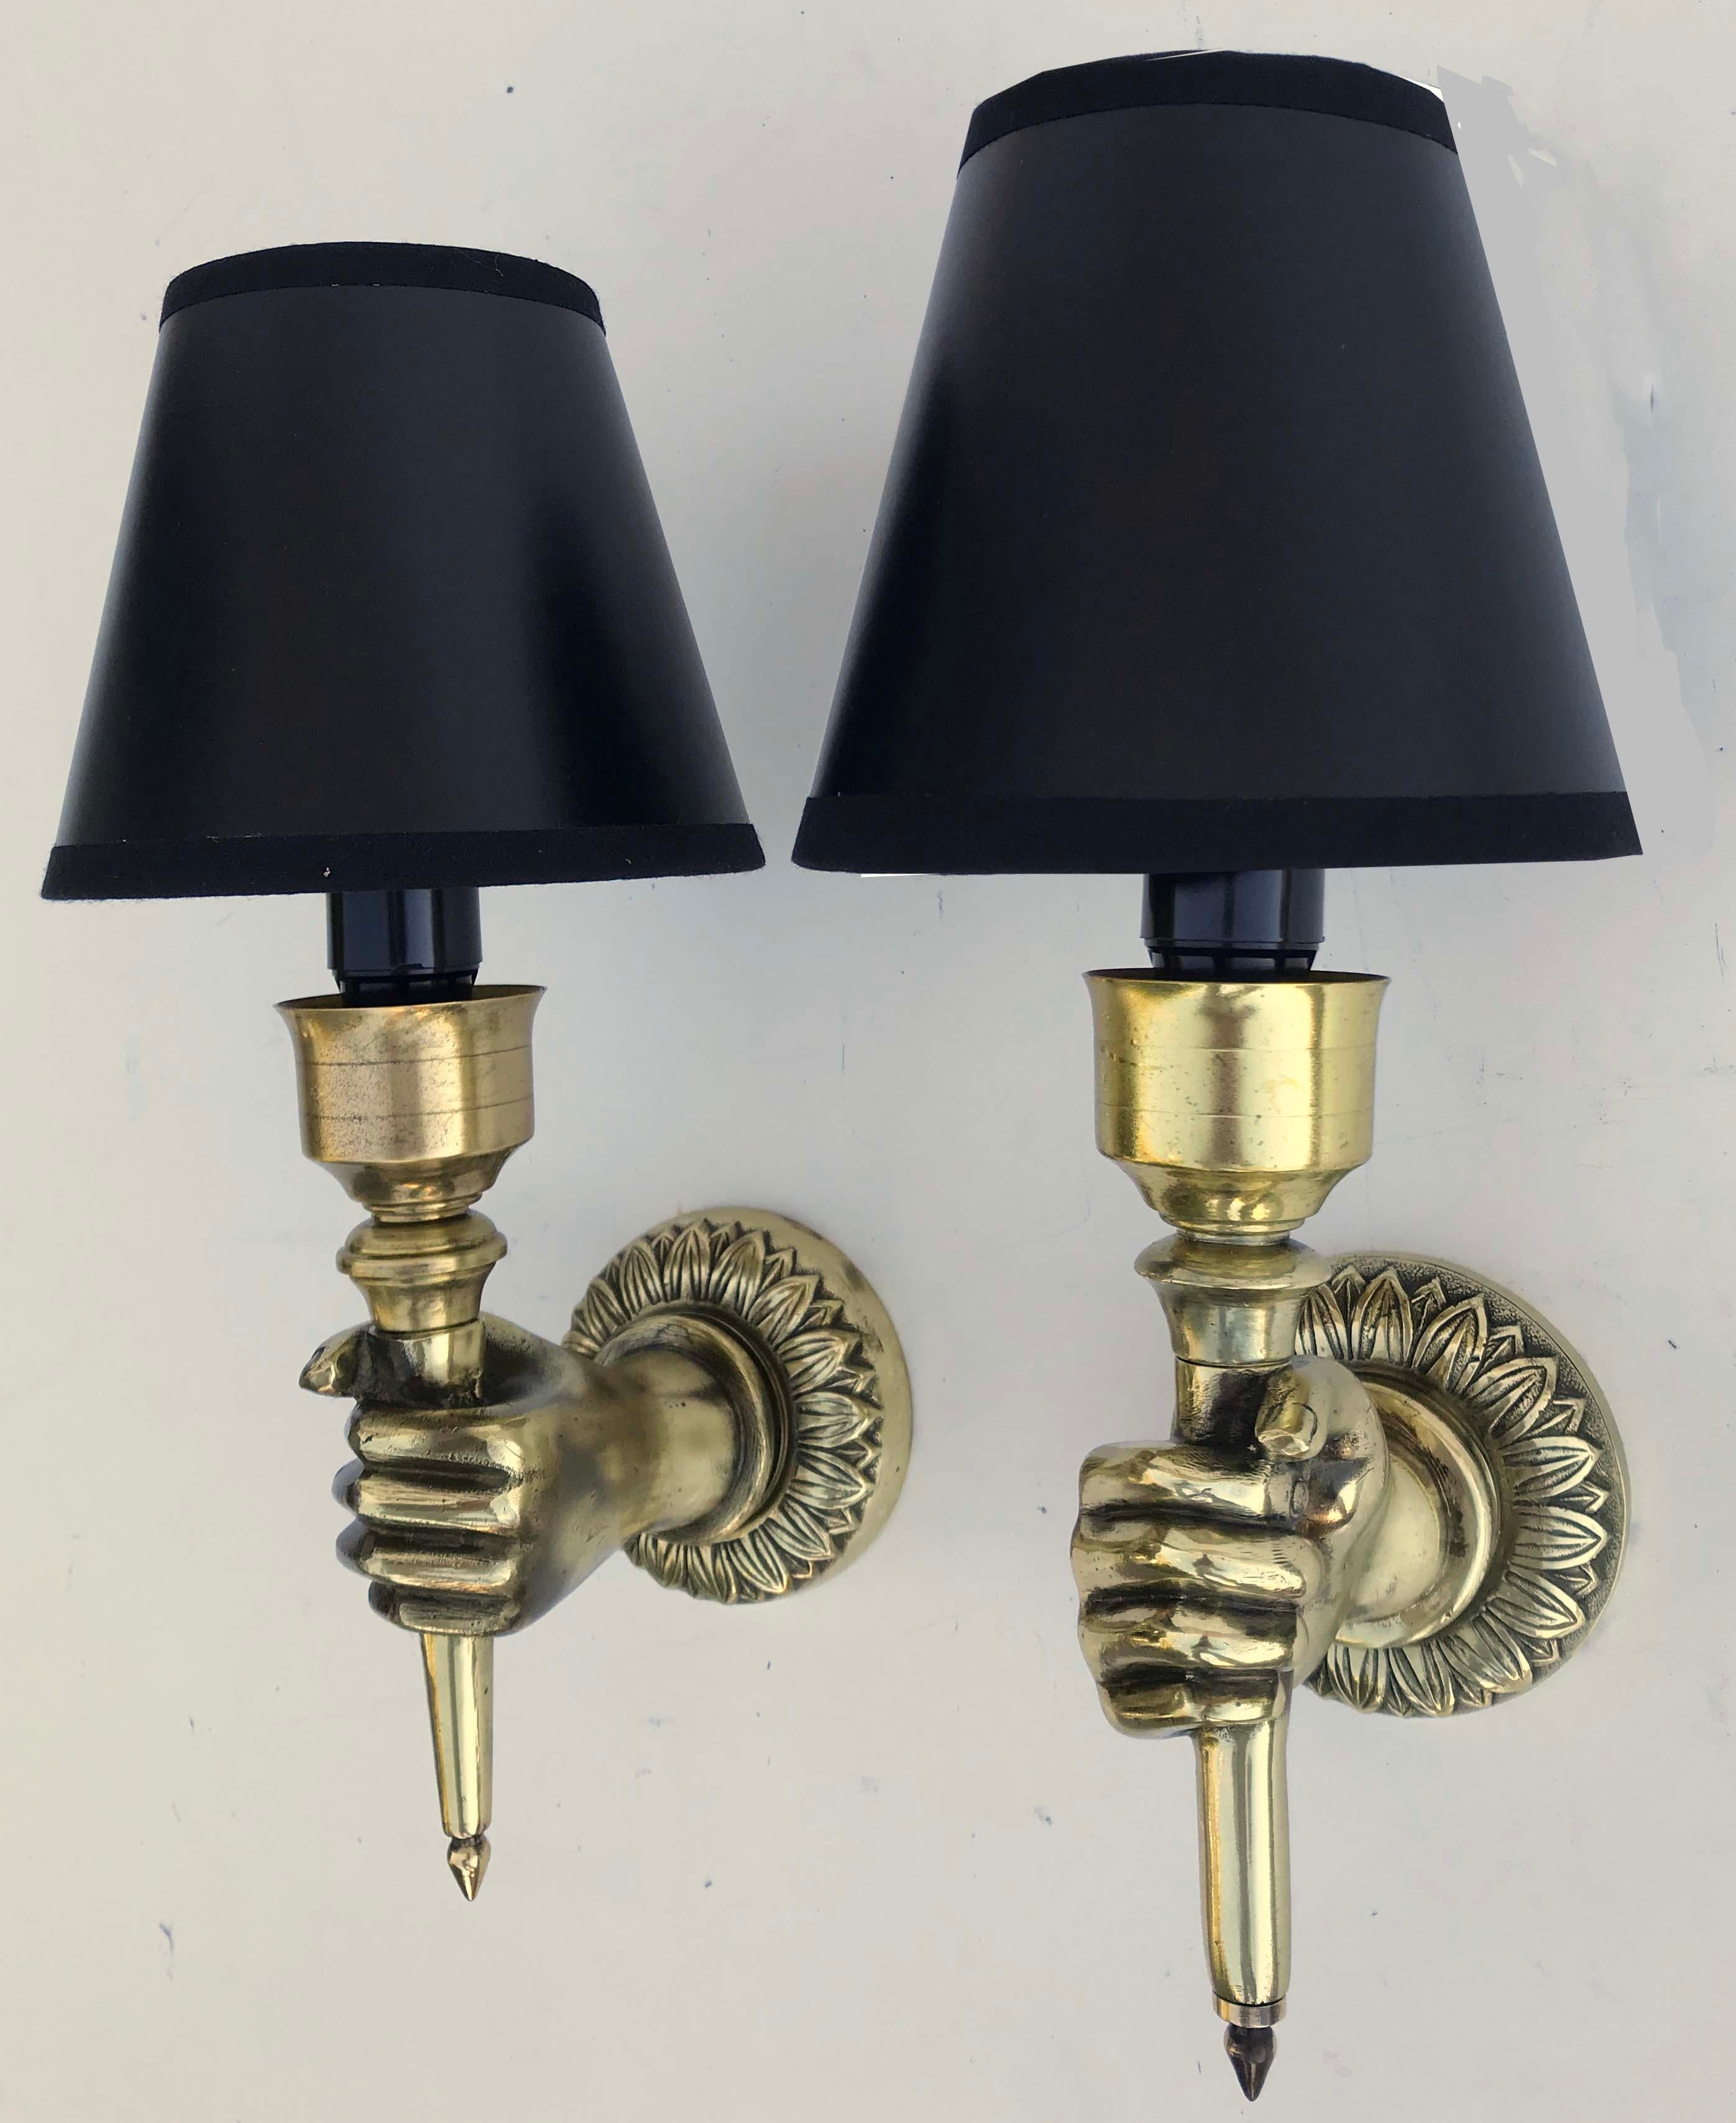  3 pair of bronze hand sconces by André Arbus
1 light, 40 watts max bulb
US rewire and in working condition
Measures: Back plate 3.1/4